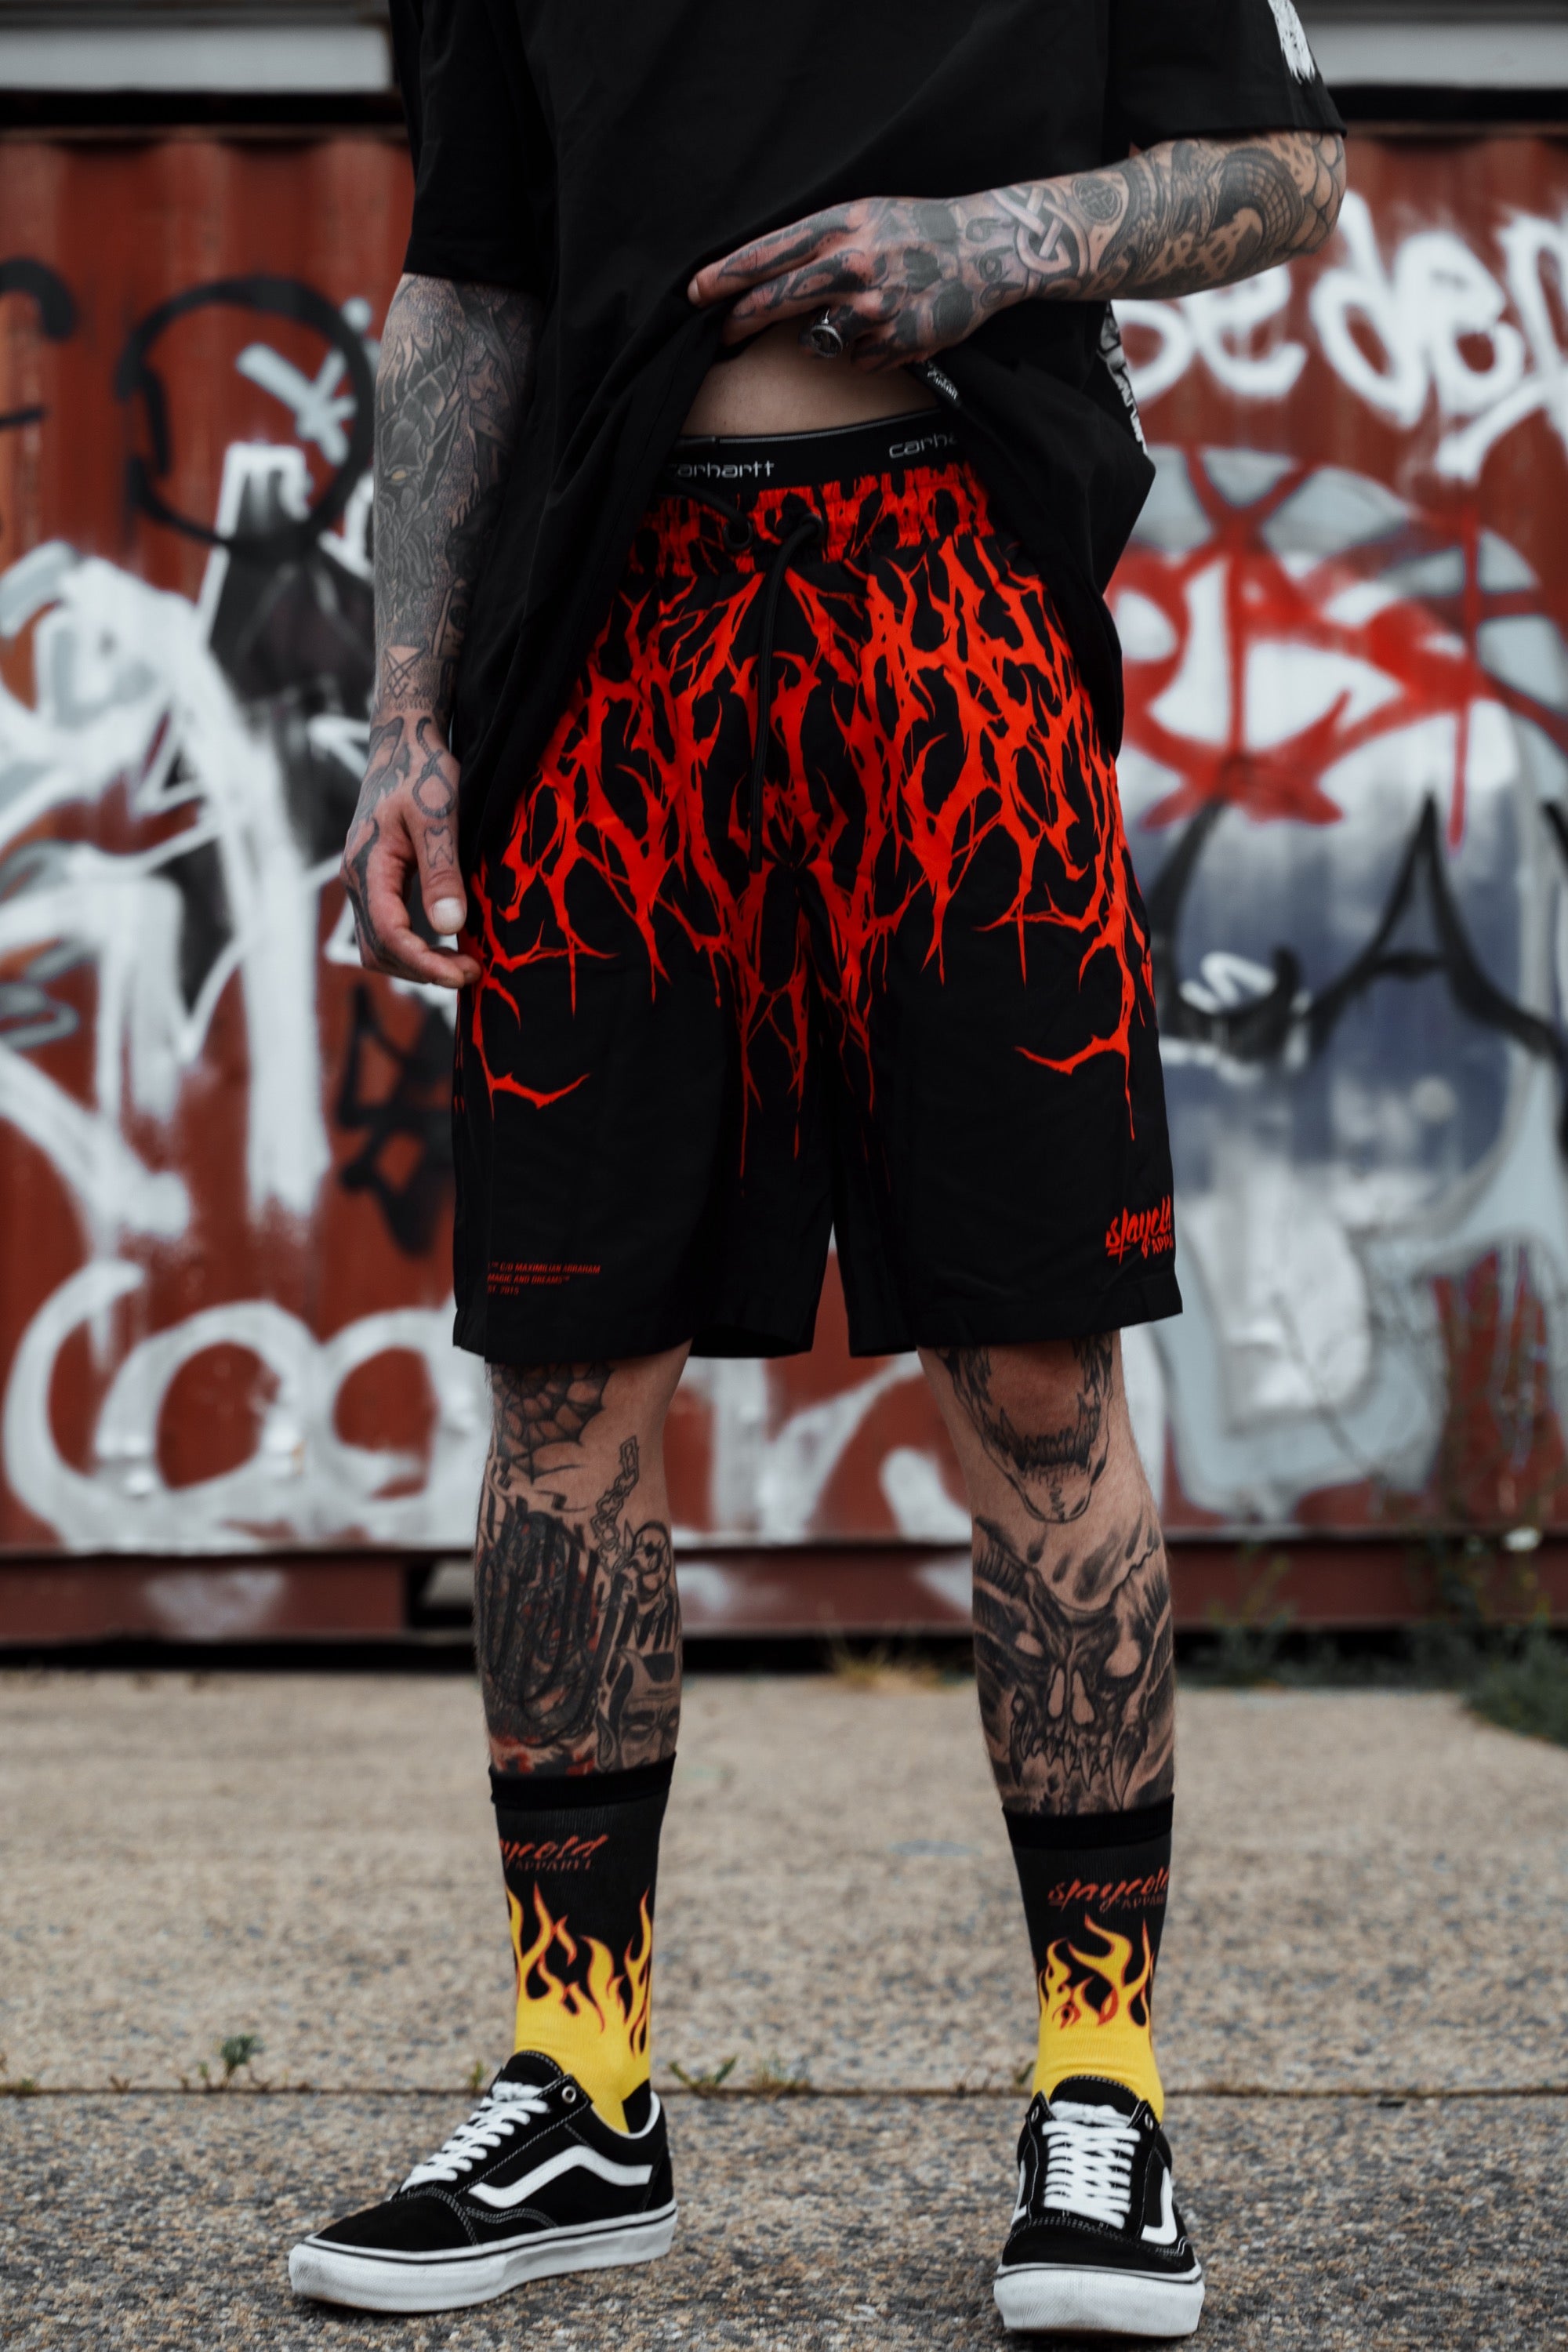 Reign Of Blood - Boardshorts